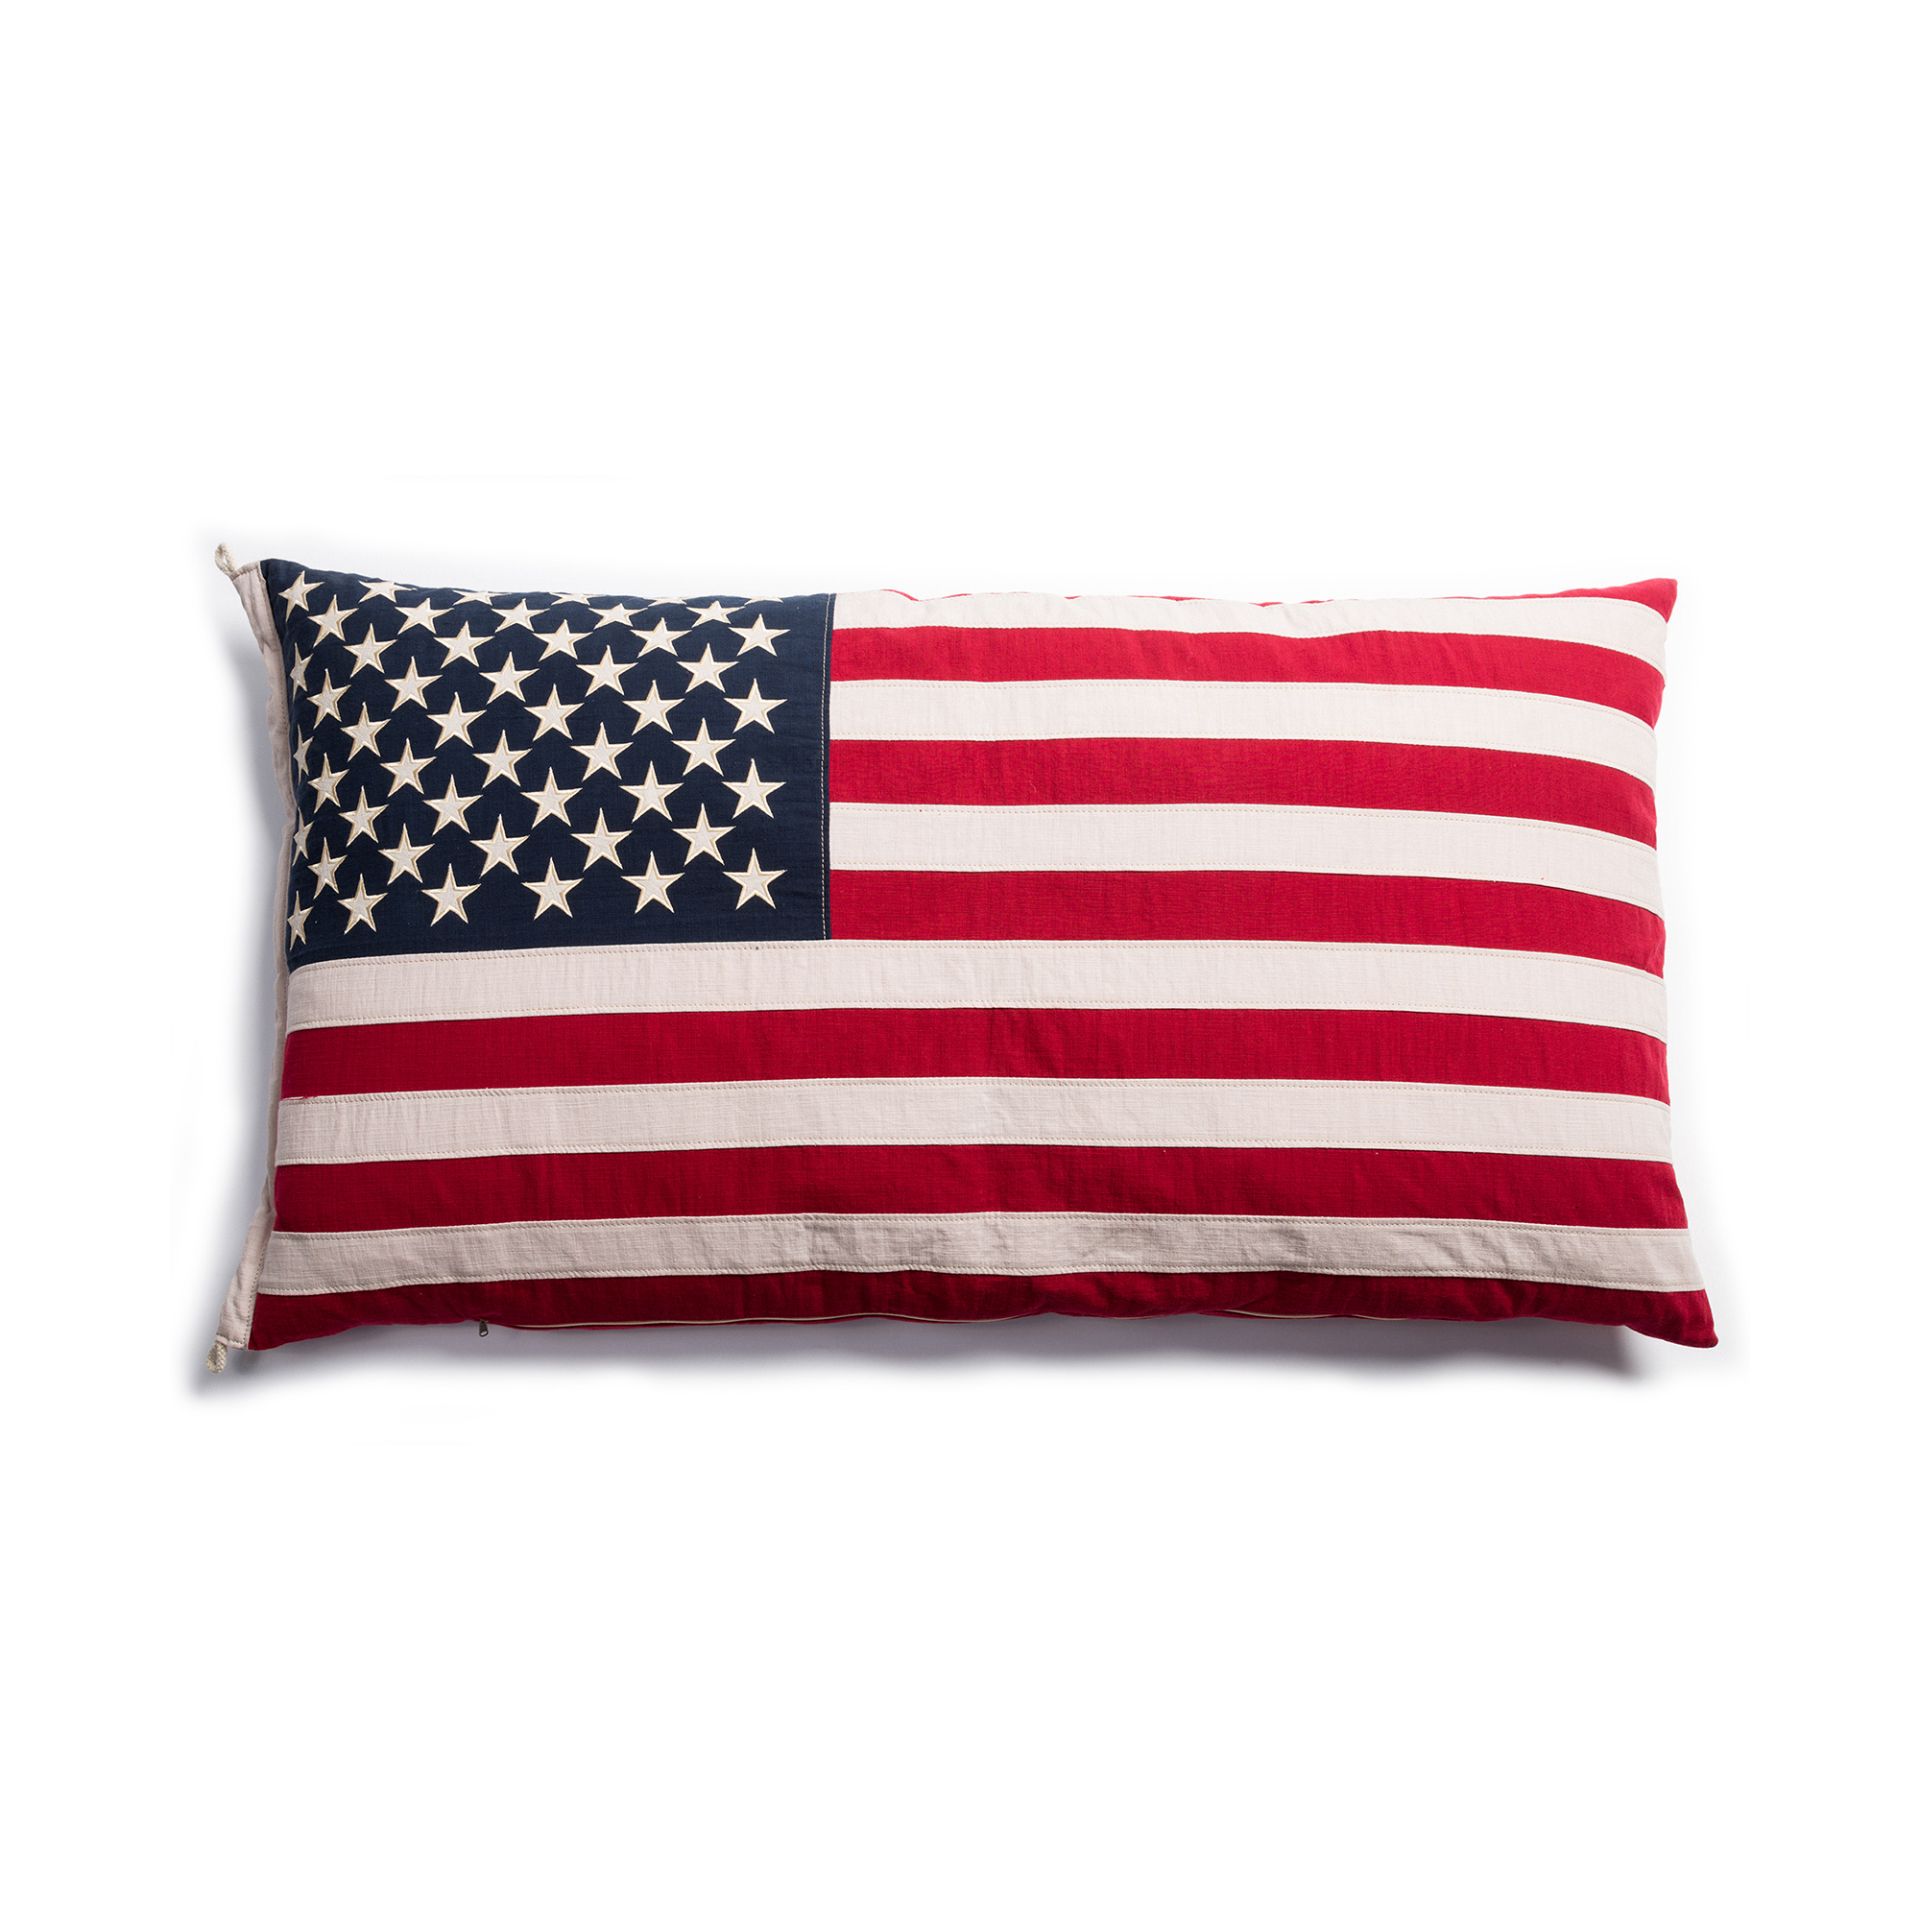 Flag Cushion Stars & Stripes Usa The Components Of The Flag Are Painstakingly Handcrafted, With Each